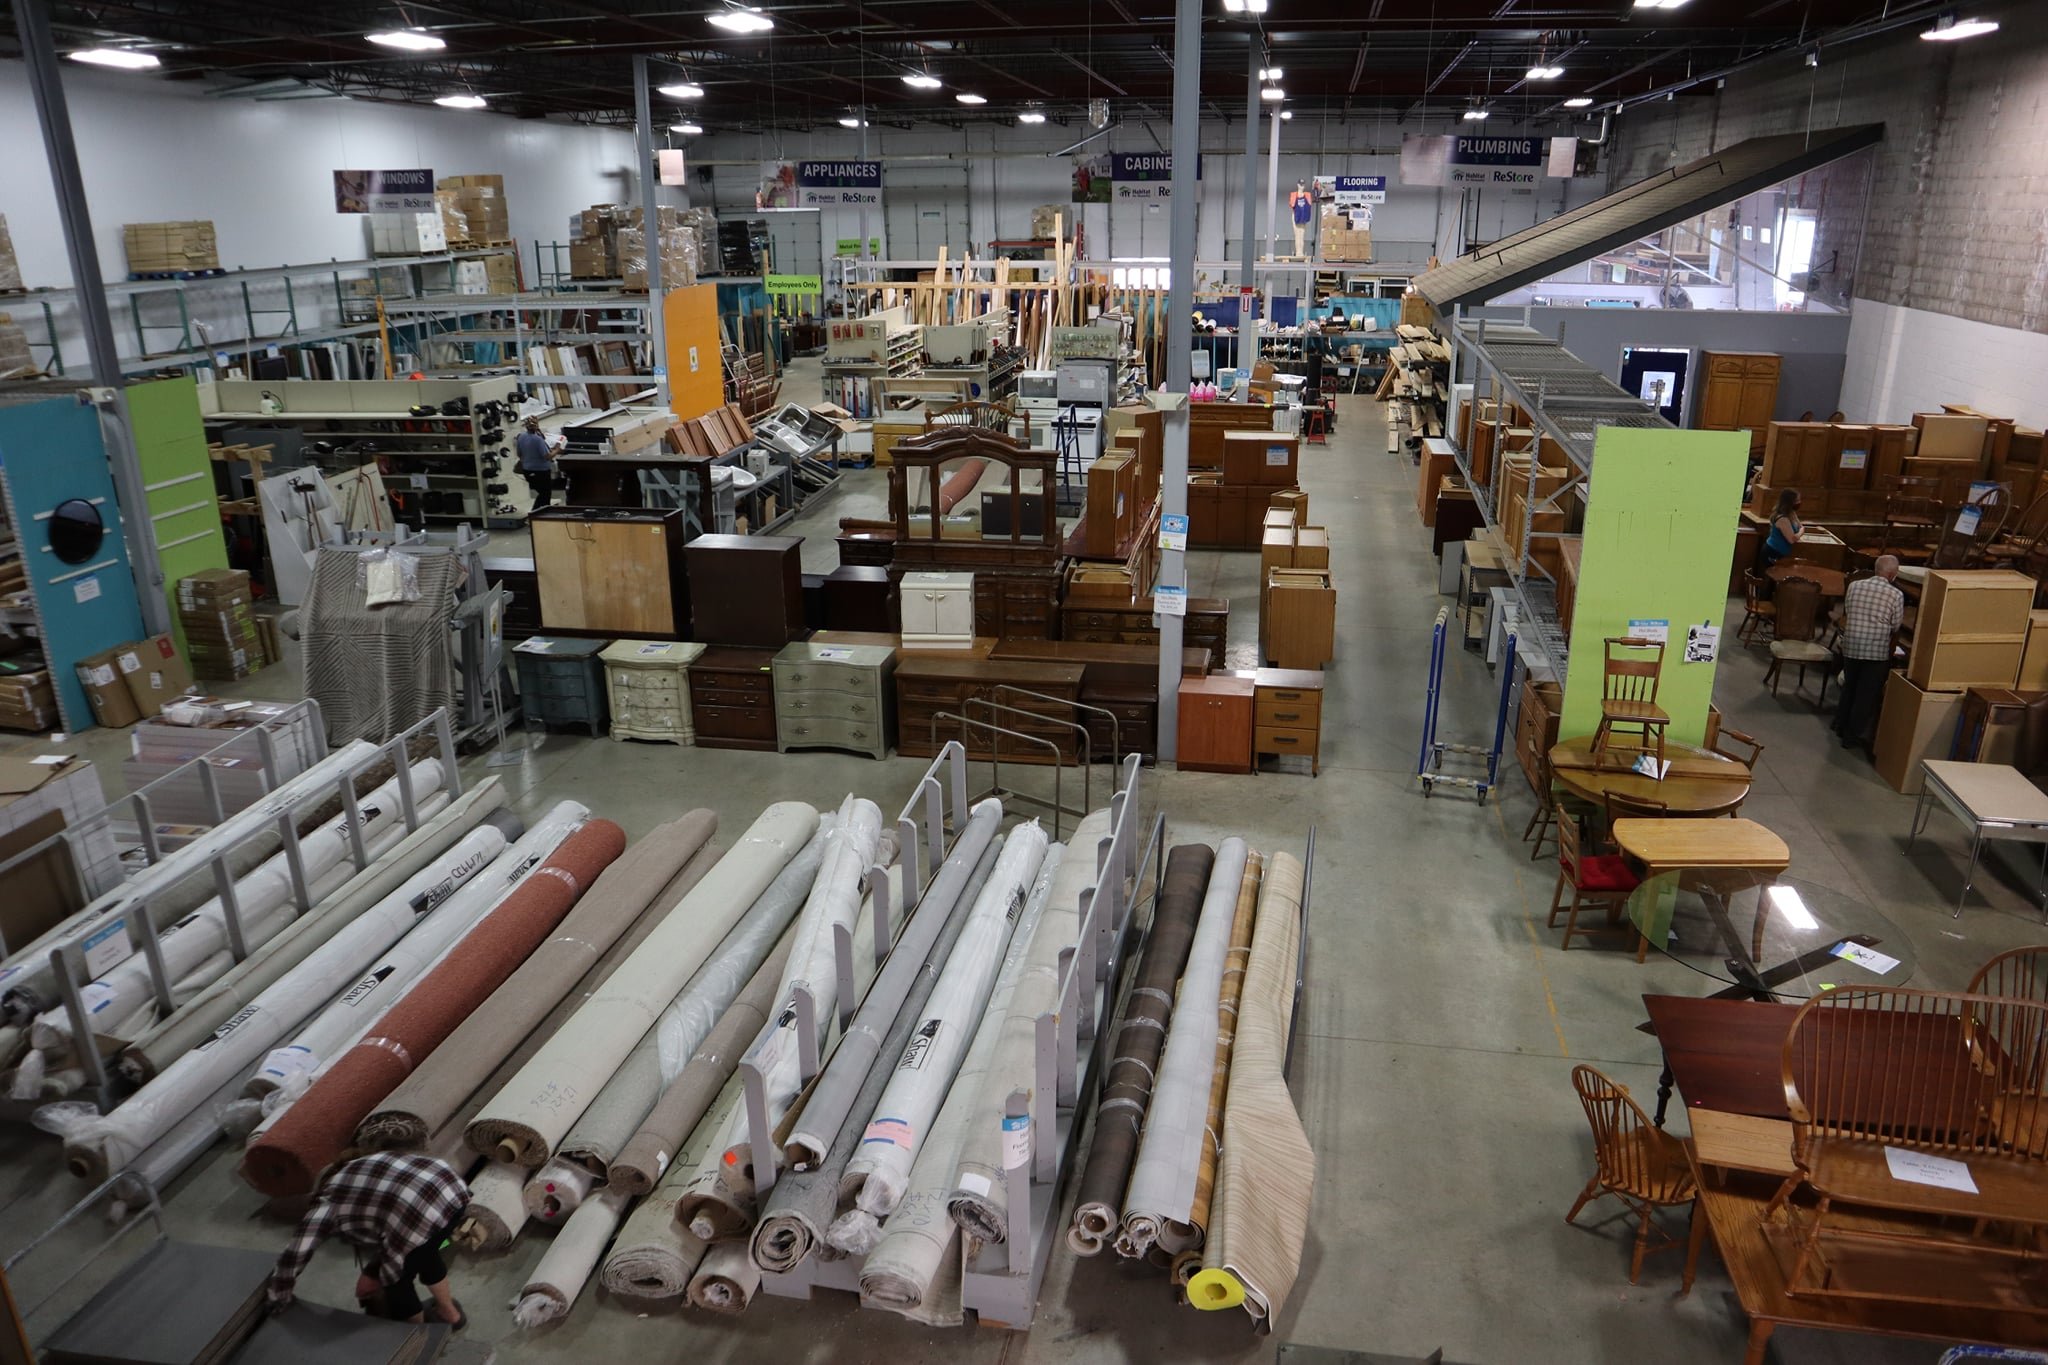 Overhead view of the Minneapolis ReStore sales floor with rolls of carpet, and rows of cabinets and furniture.